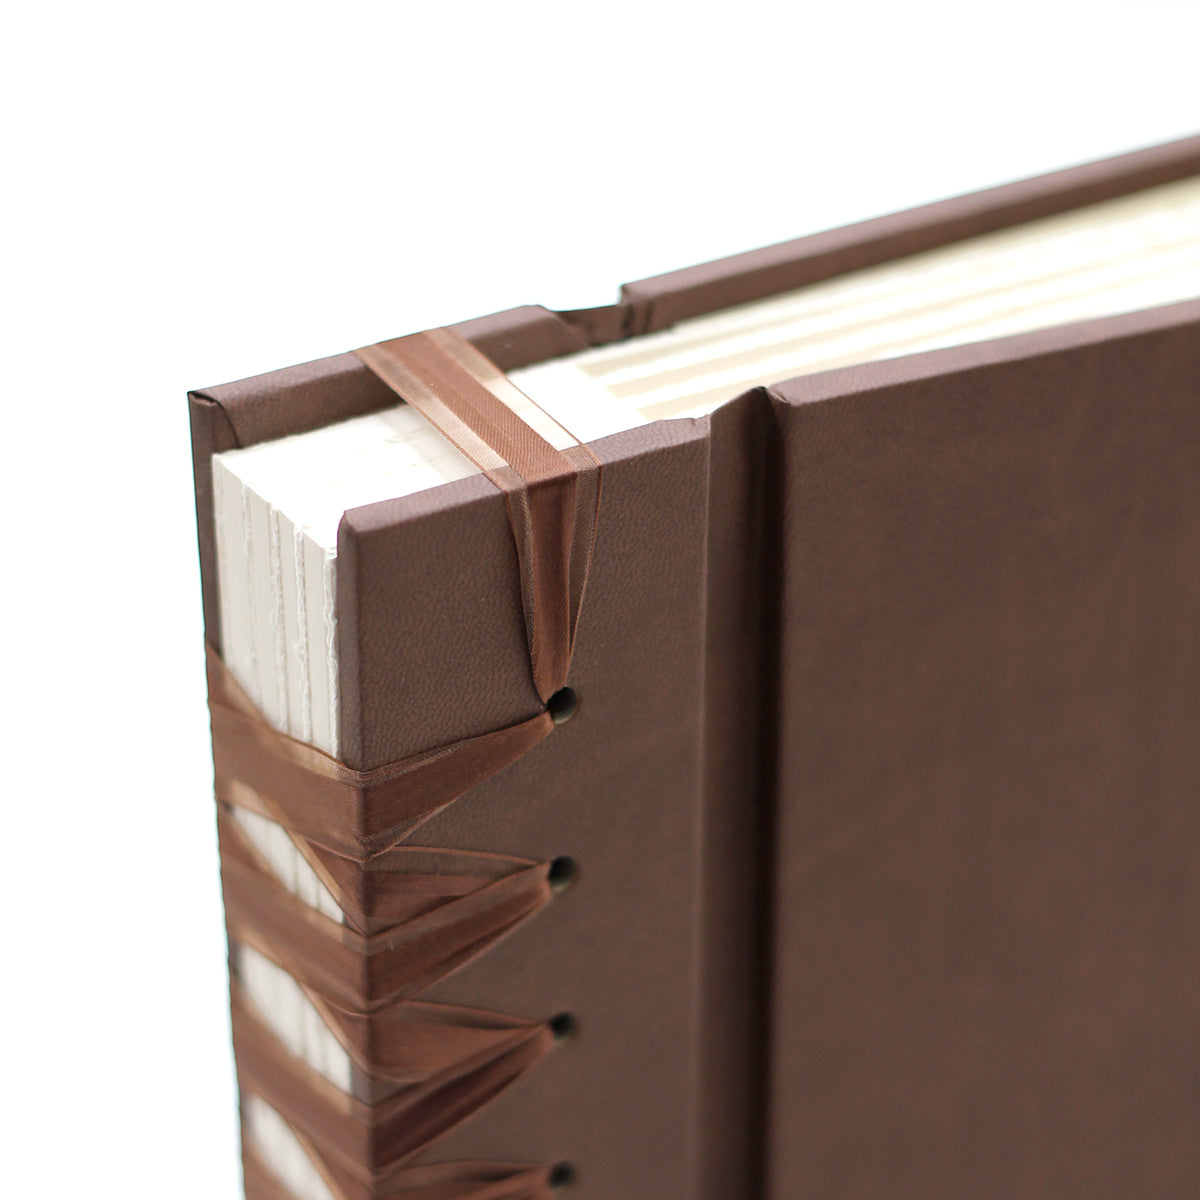 Large 10 x 15 Paper Page Album | Cover: Mocha Vegan Leather | Available Personalized